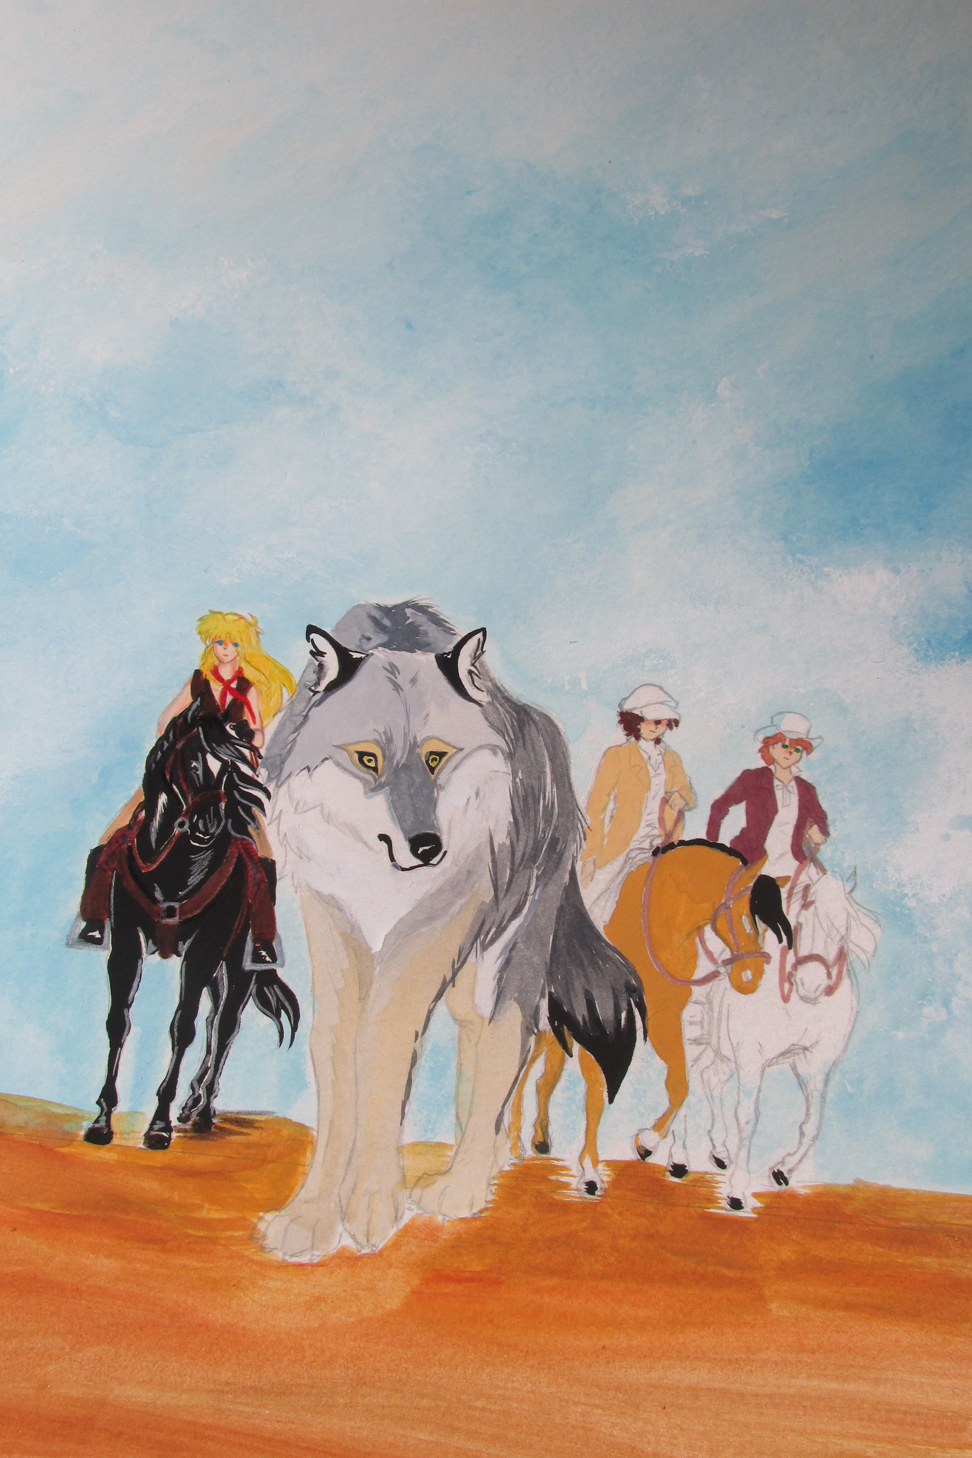 Legends of the West illustration watercolors and color pencils